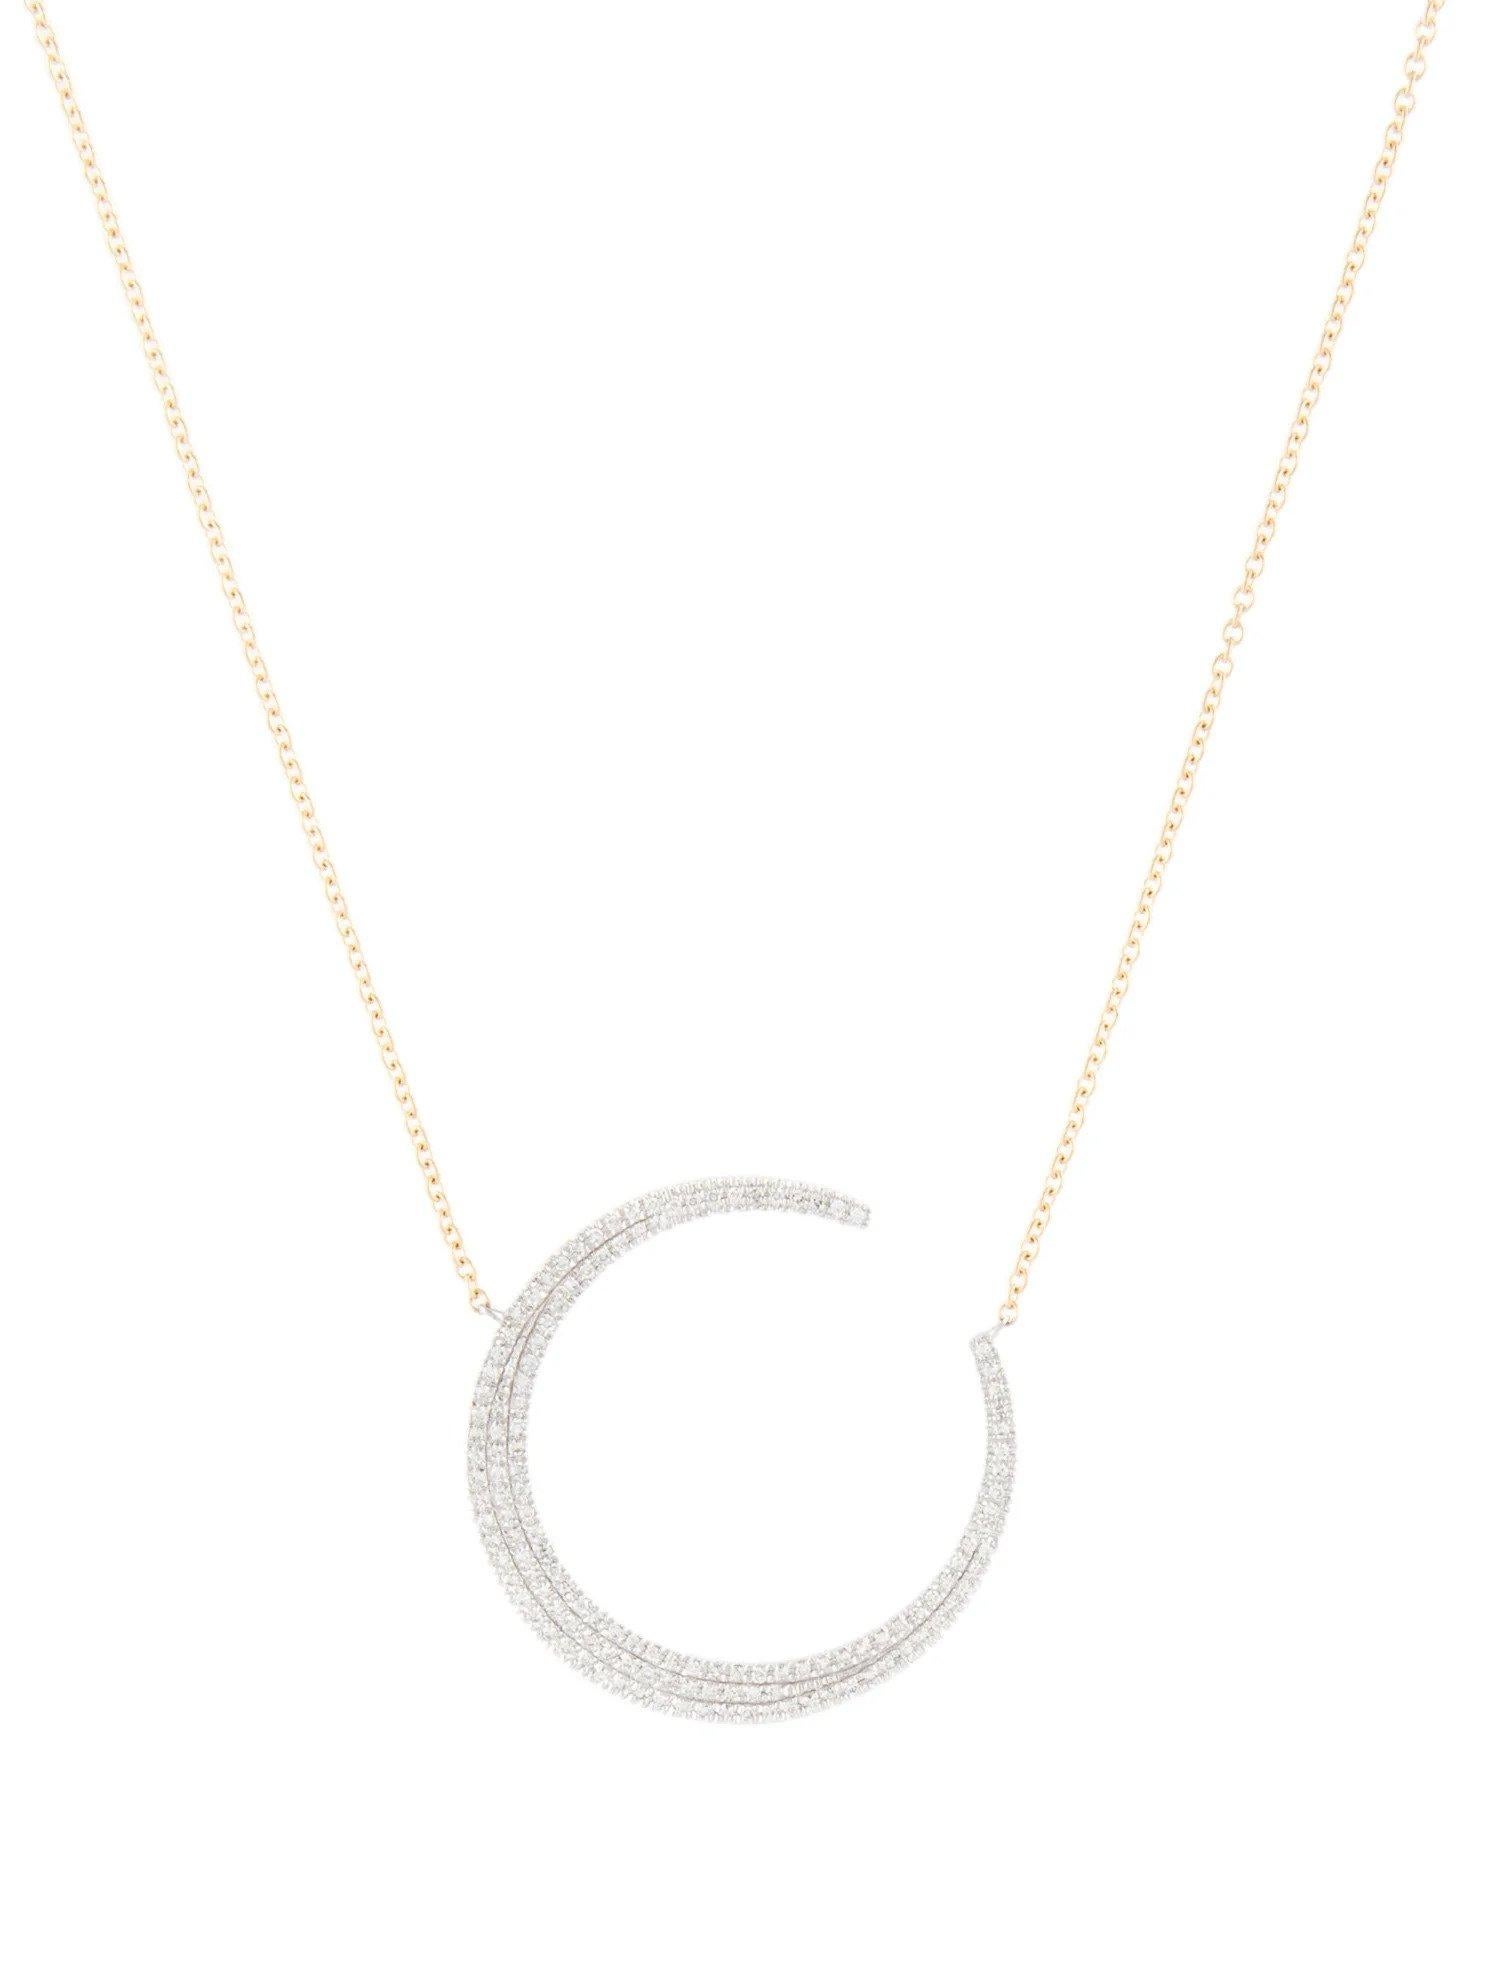 Round Cut 0.37 Carat Diamond Crescent Moon White & Yellow Gold Pendant Necklace For Sale